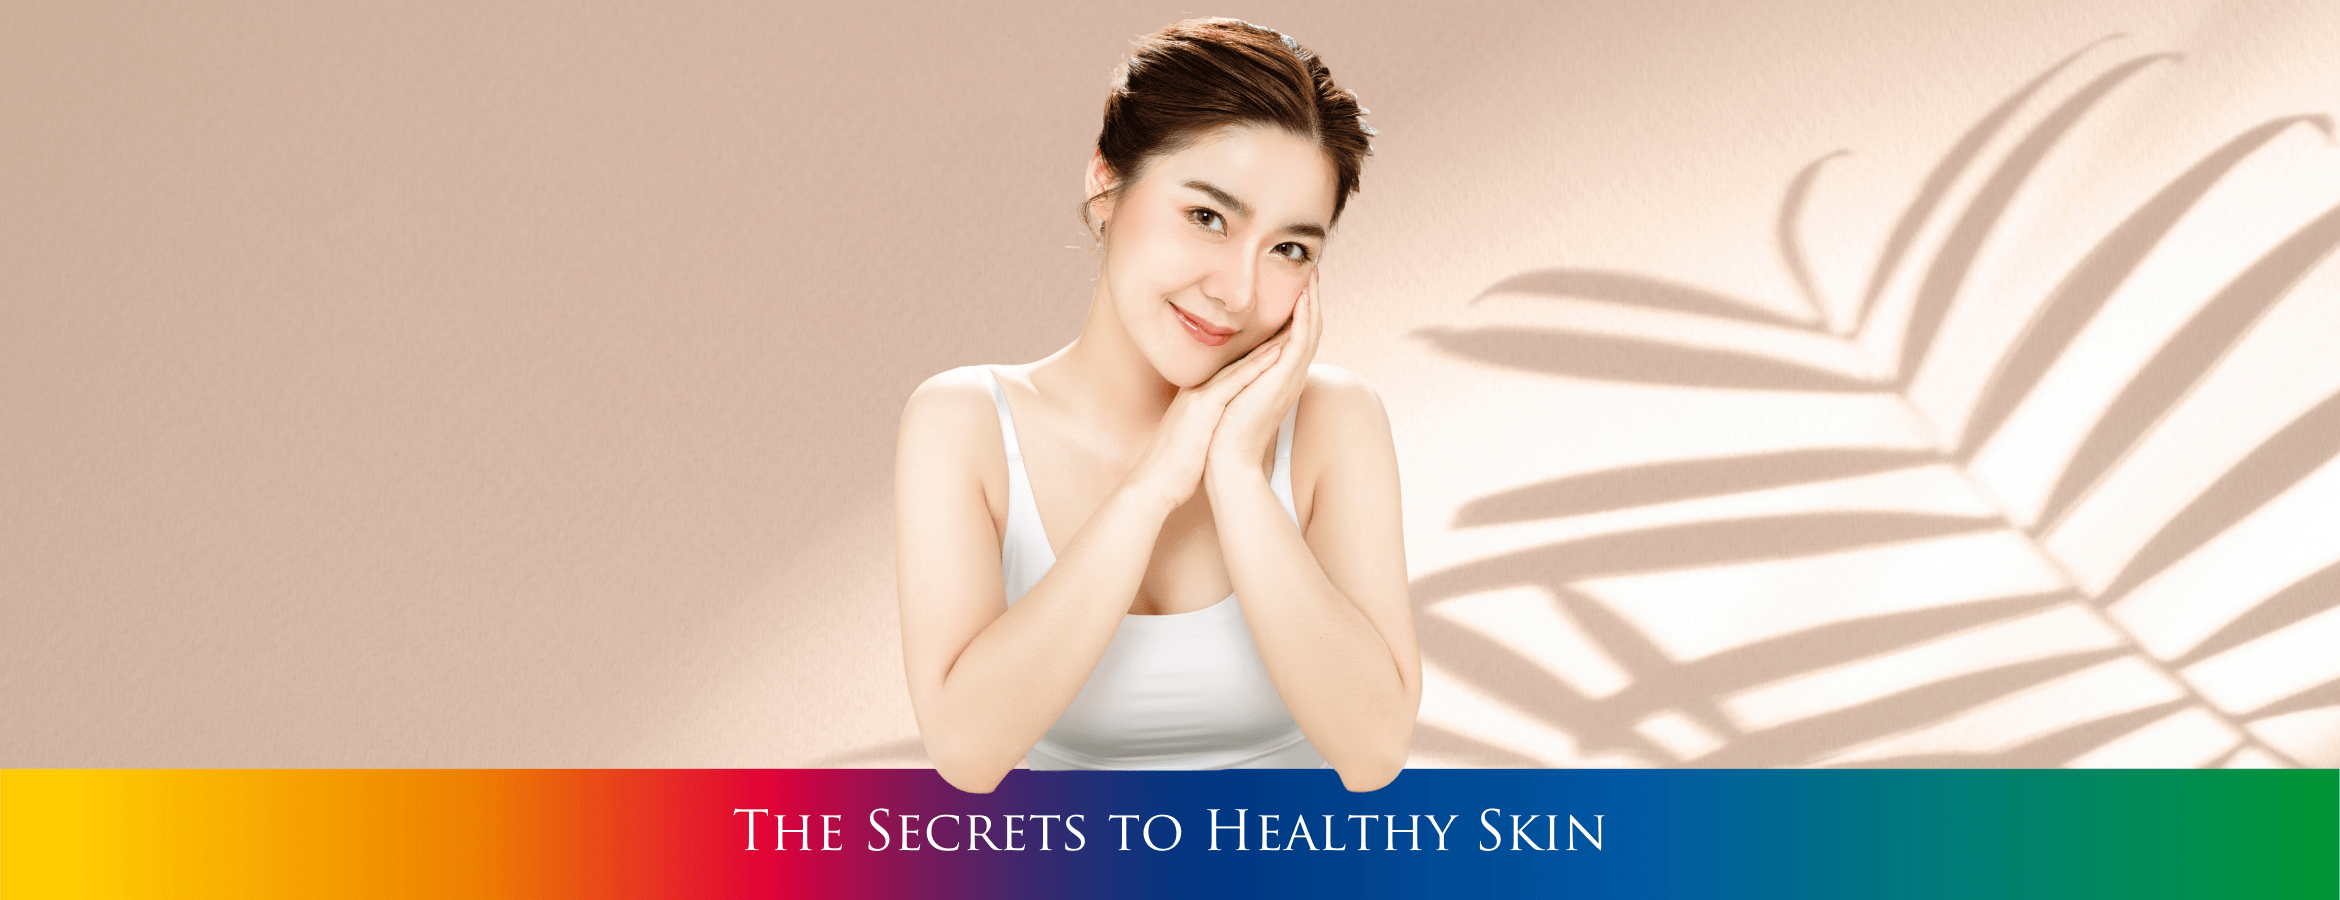 The Secrets to Healthy Skin